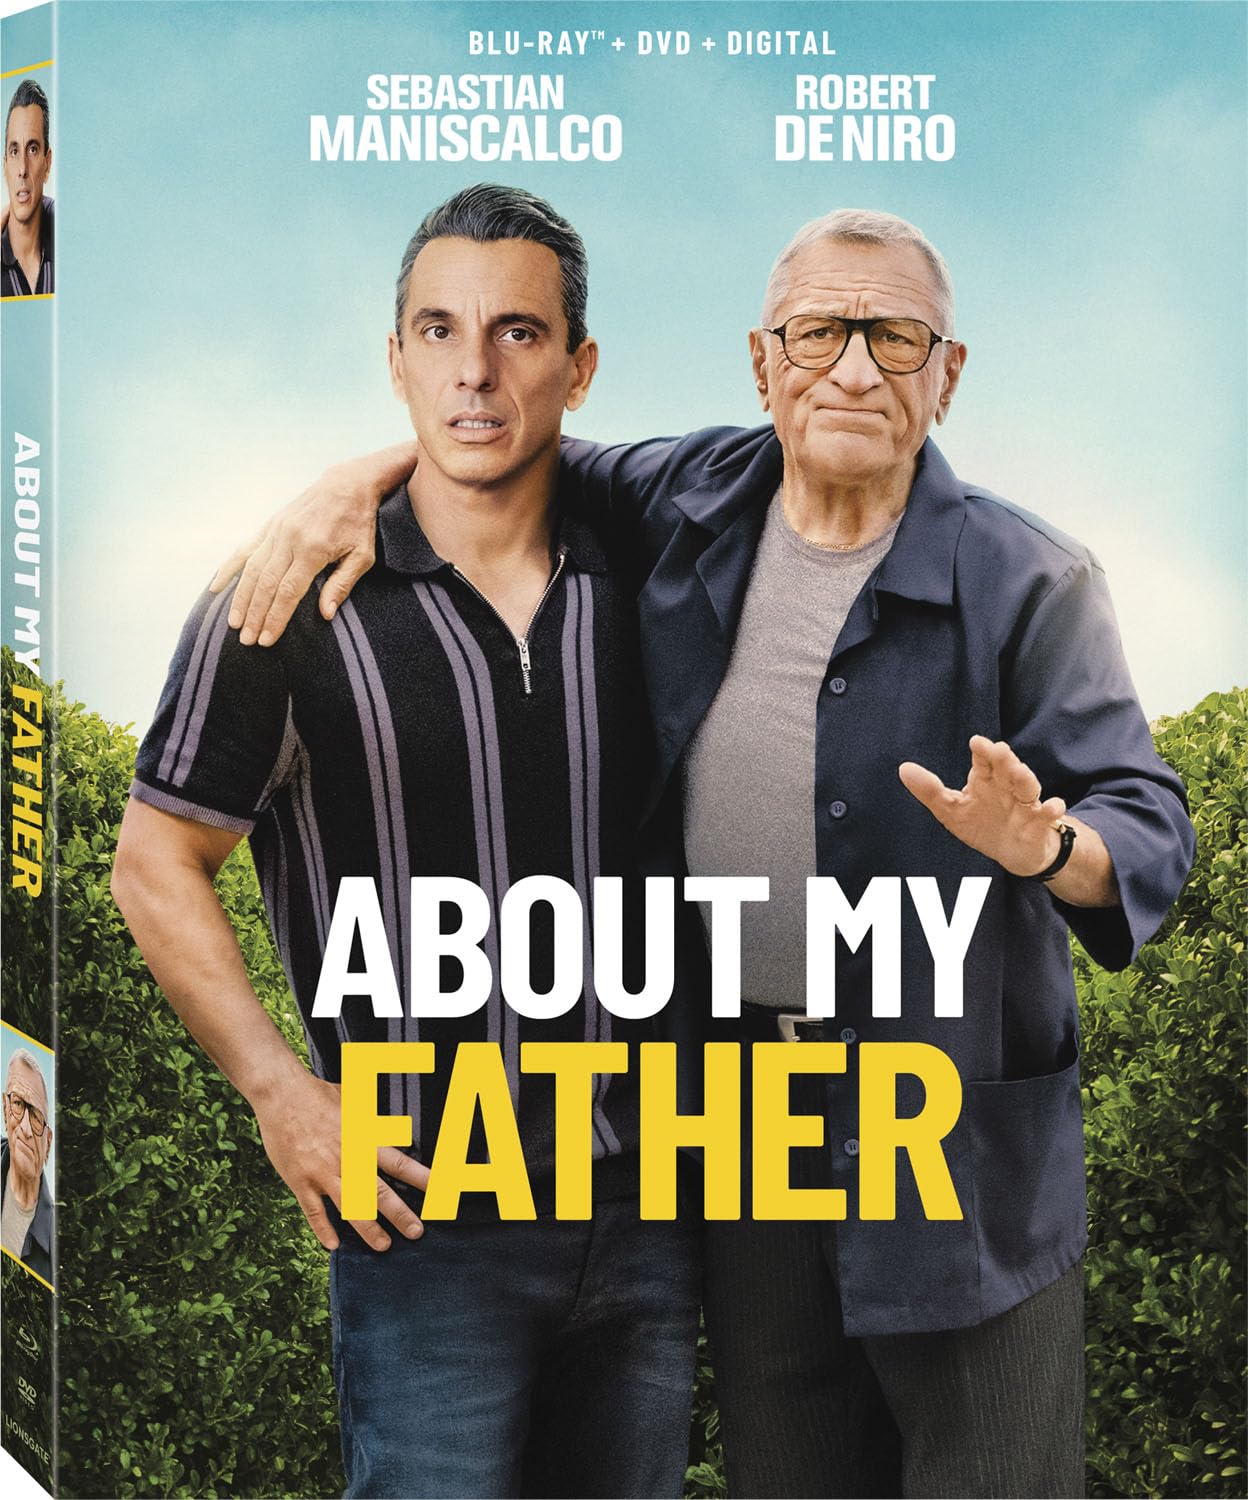 About My Father HD Code (iTunes or Vudu)